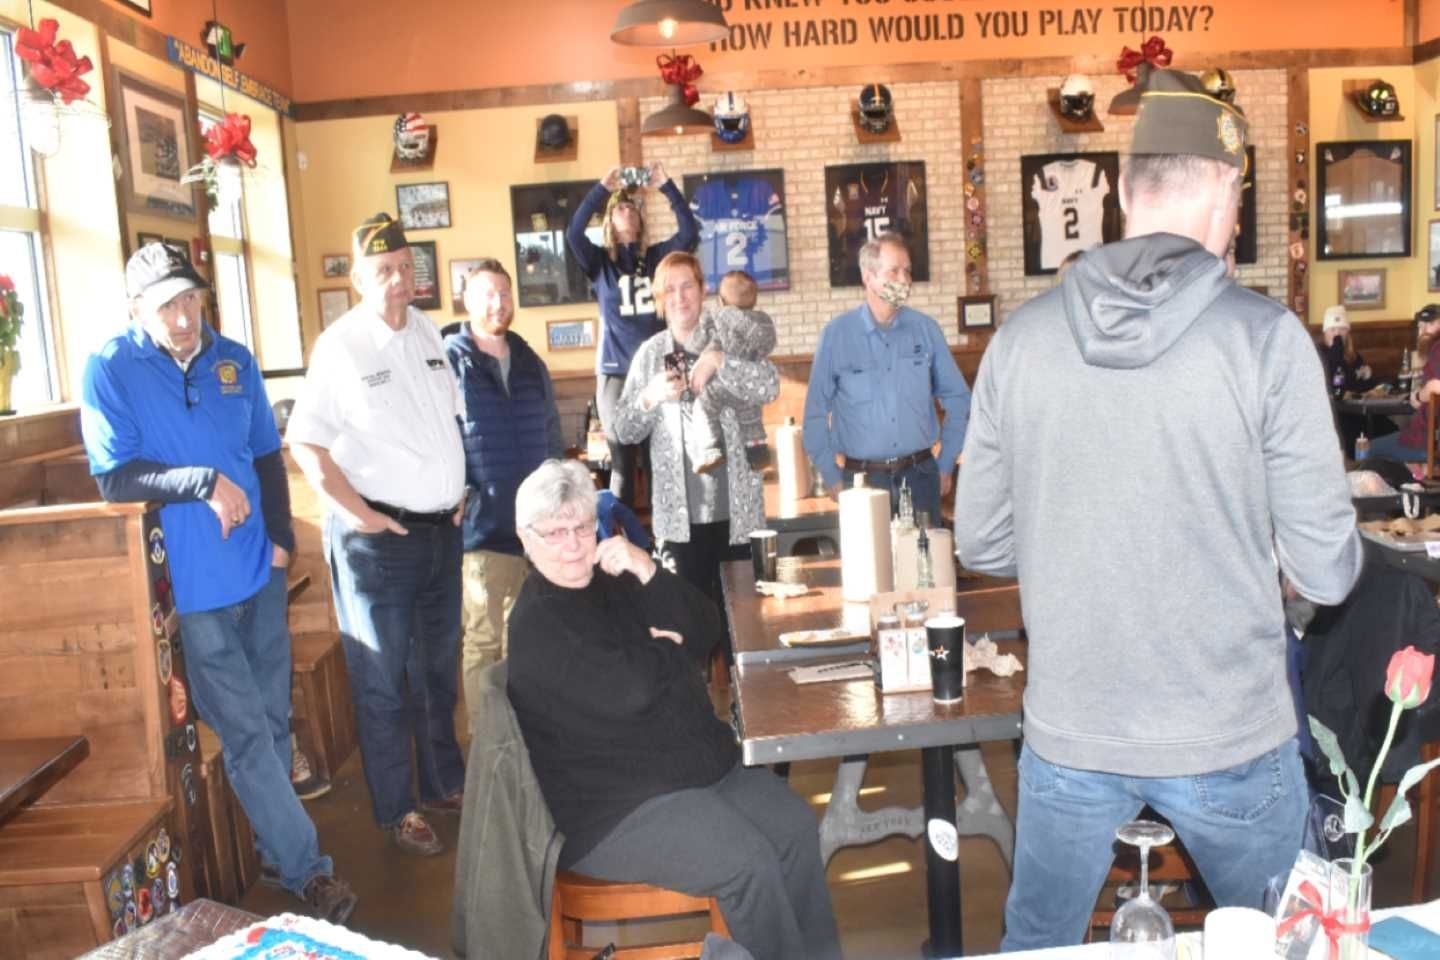 Members and Guest gathered to hear Commander Magnetta read proclamation from Grayslake Mayor Rhett Taylog reading Proclamation announcing December 12, 2021 Ron Hill Memorial VFW Post 22454 Day celebrating the 50th Anniversary of our Charter. 